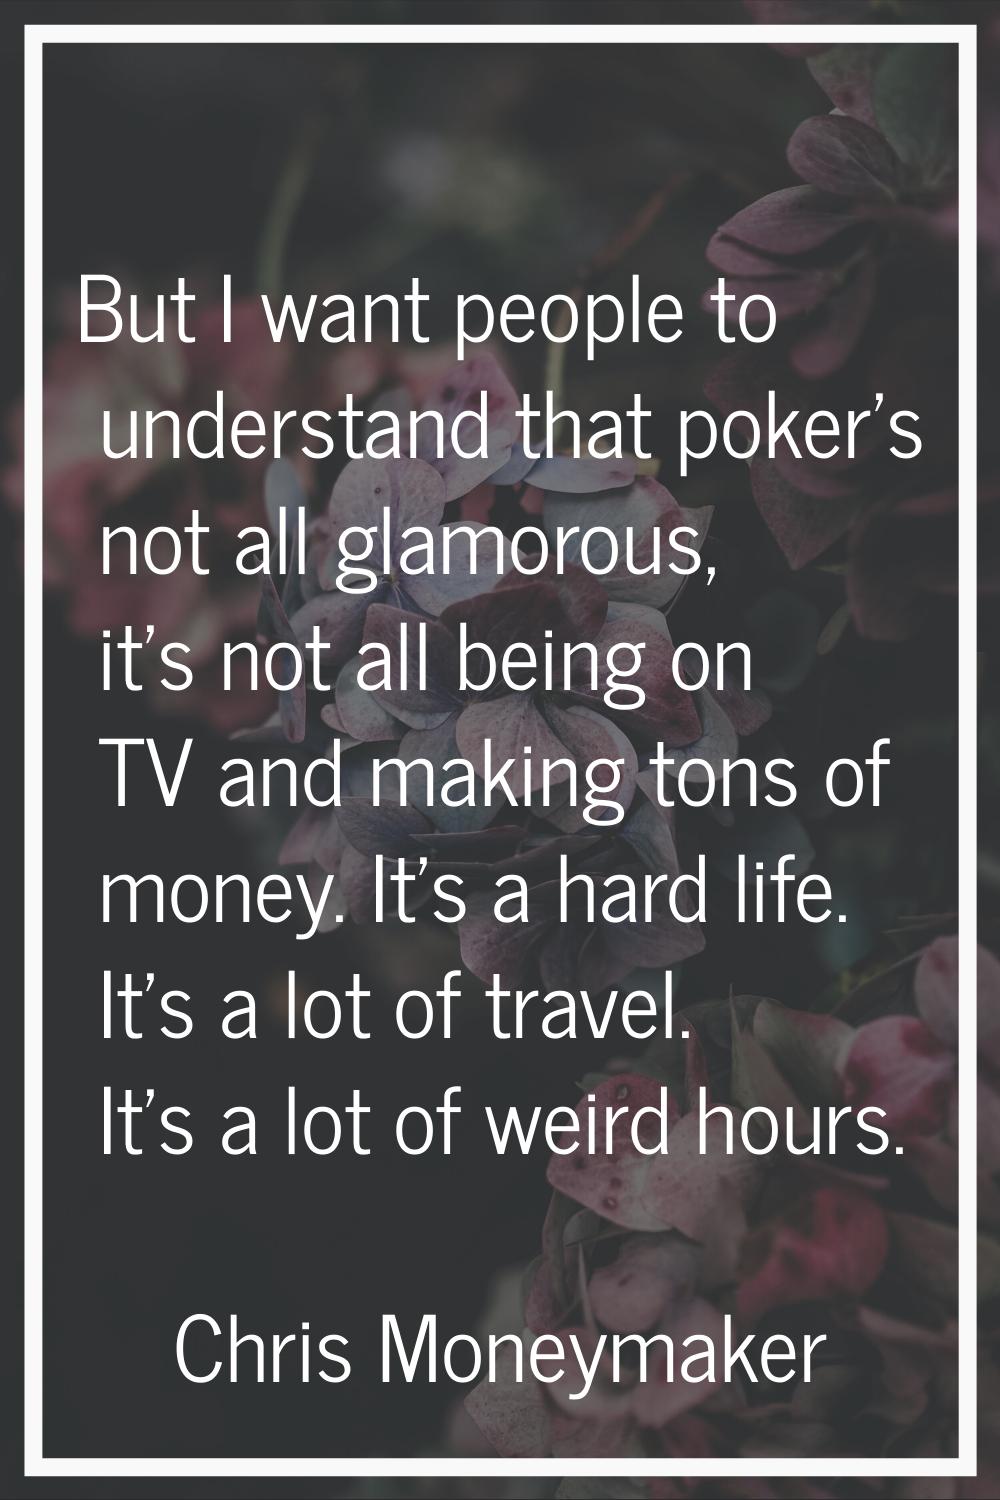 But I want people to understand that poker's not all glamorous, it's not all being on TV and making